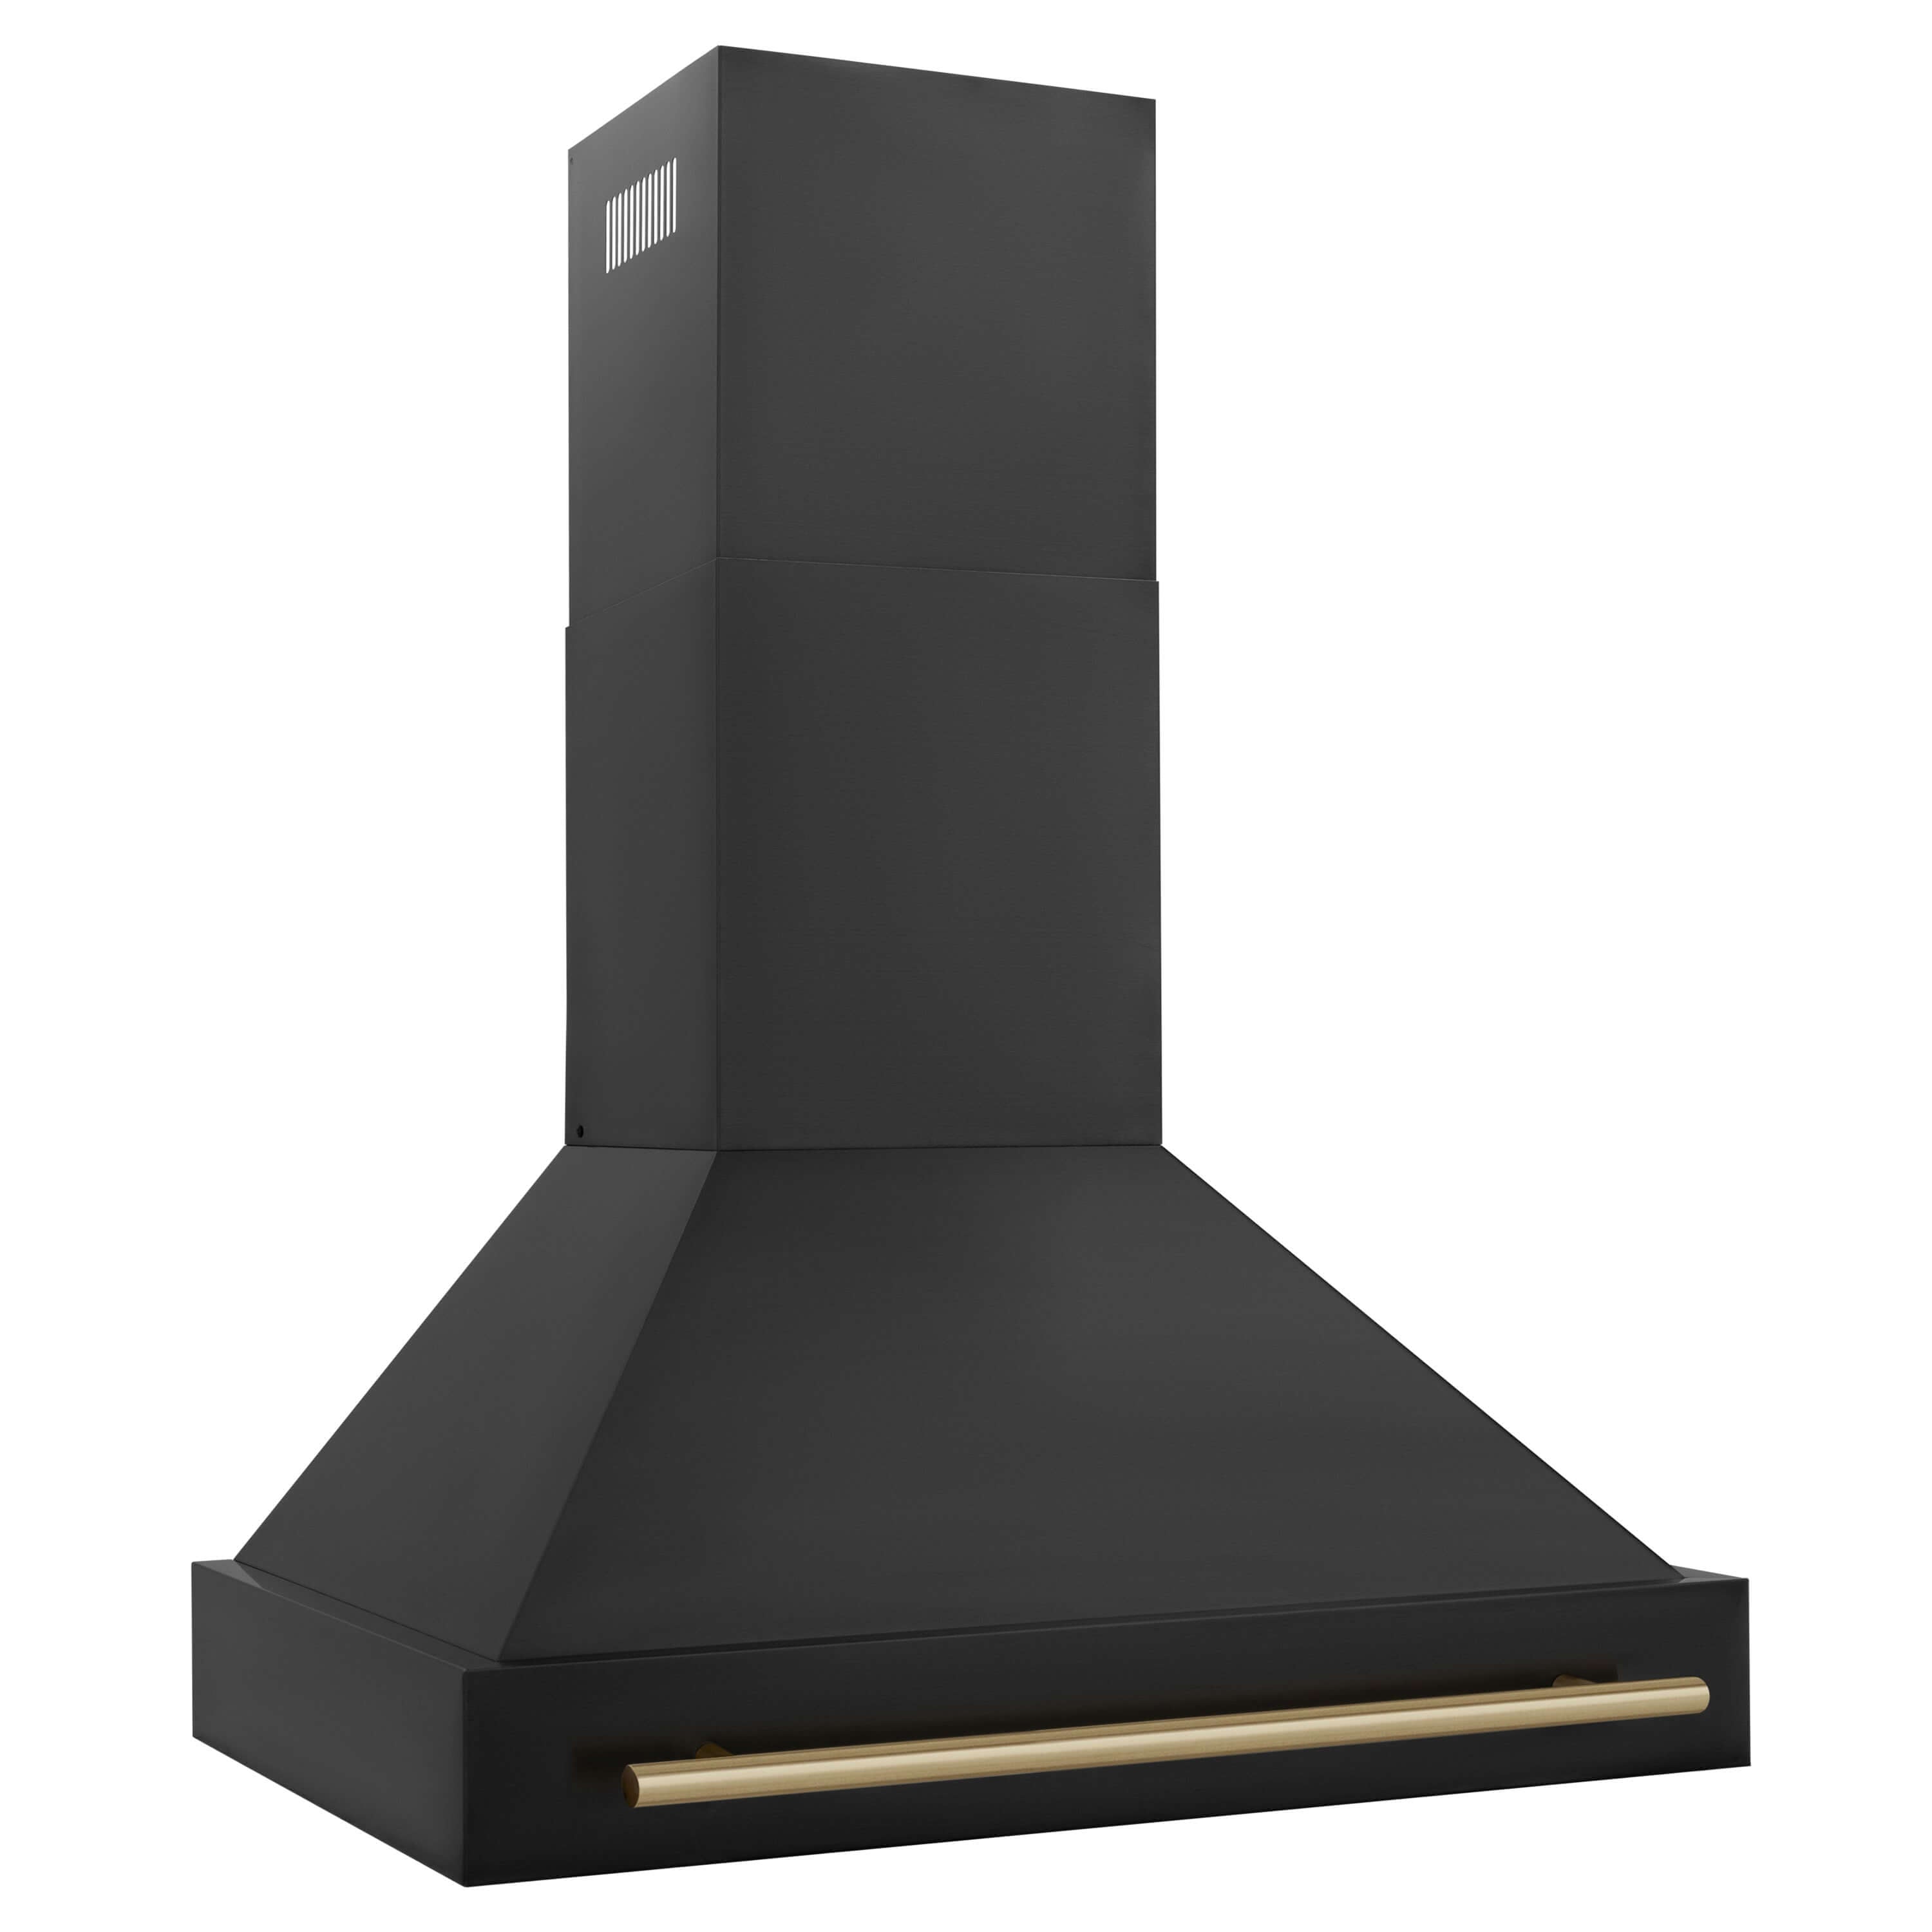 ZLINE Autograph Edition 36 in. Black Stainless Steel Range Hood with Handle (BS655Z-36) Champagne Bronze side.